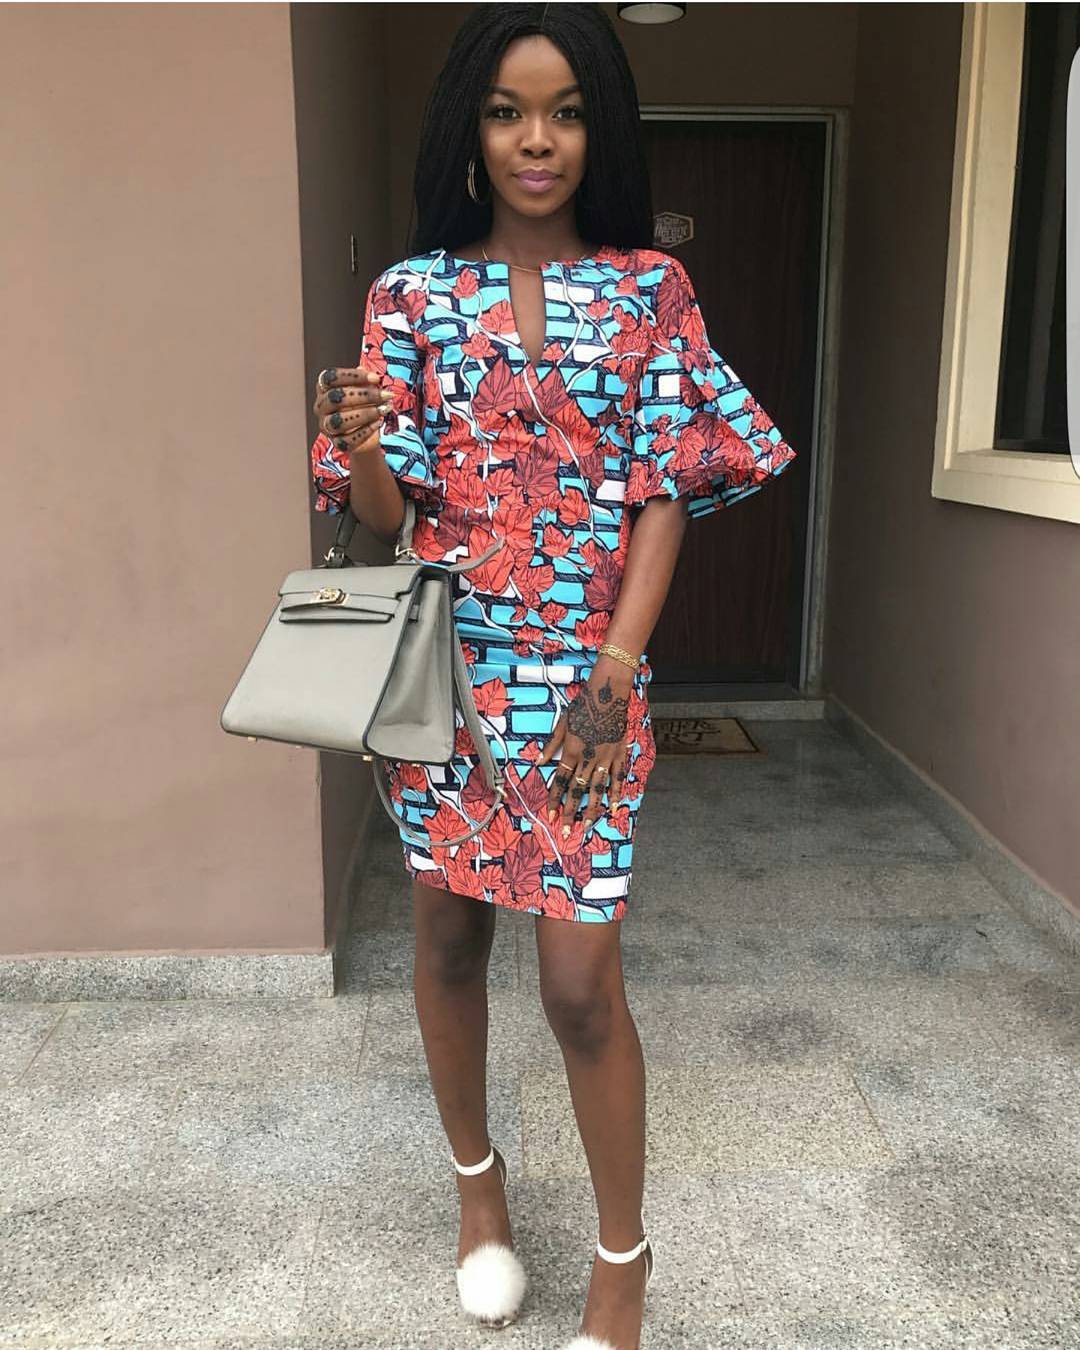 Don’t Your Just Love These Friday Ankara Styles?